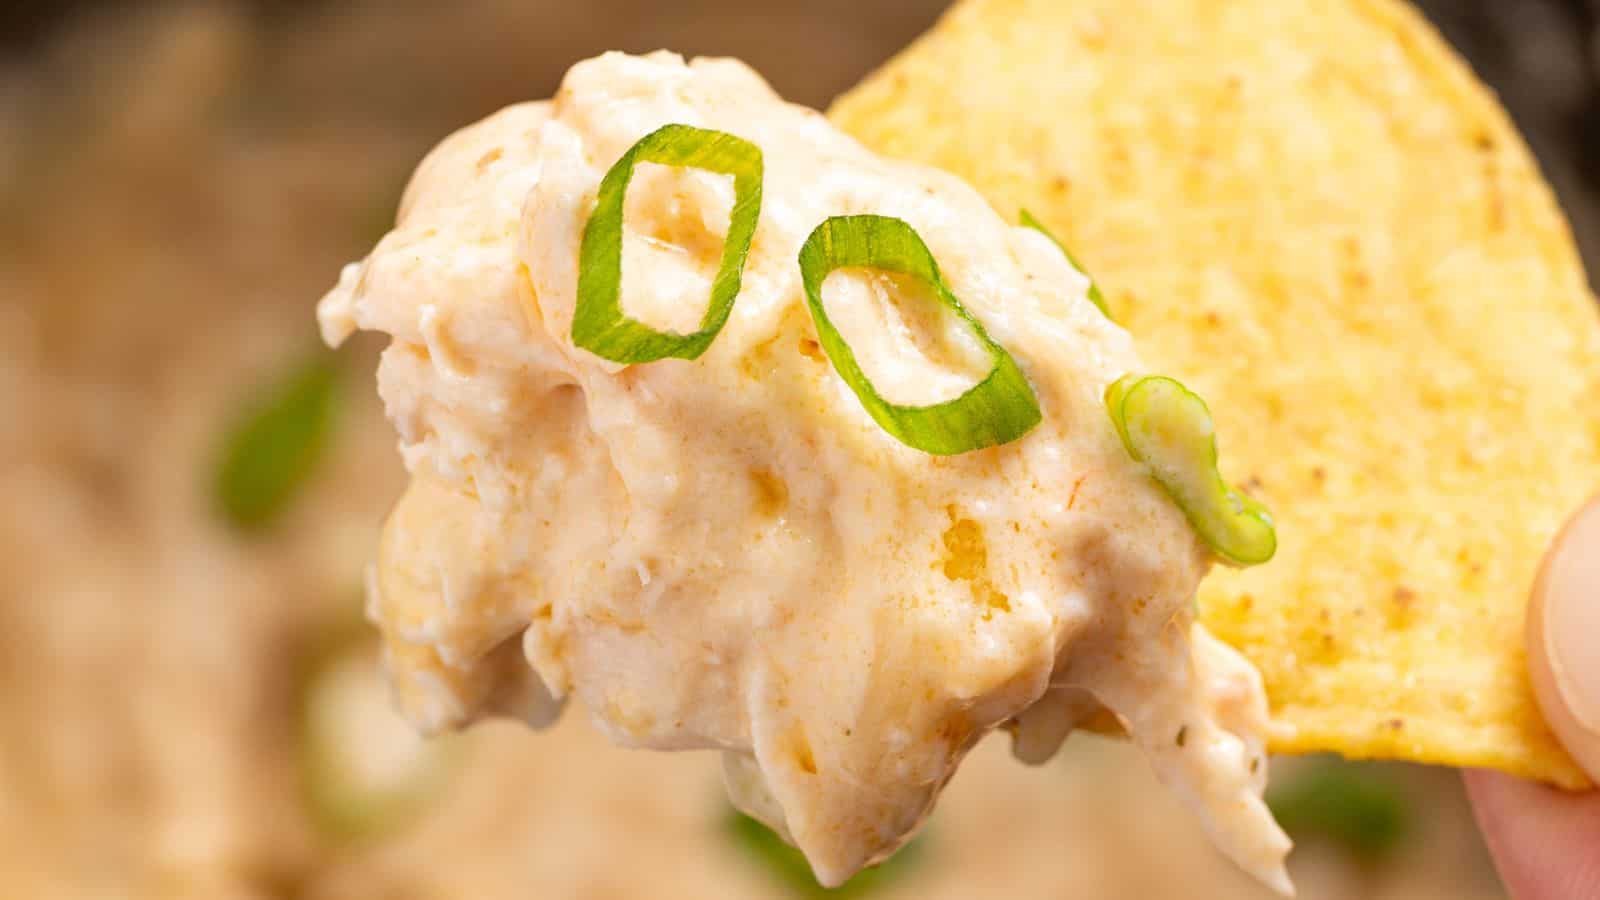 A hand holding a tortilla chip dipped in creamy Buffalo chicken dip, garnished with slices of green onion.